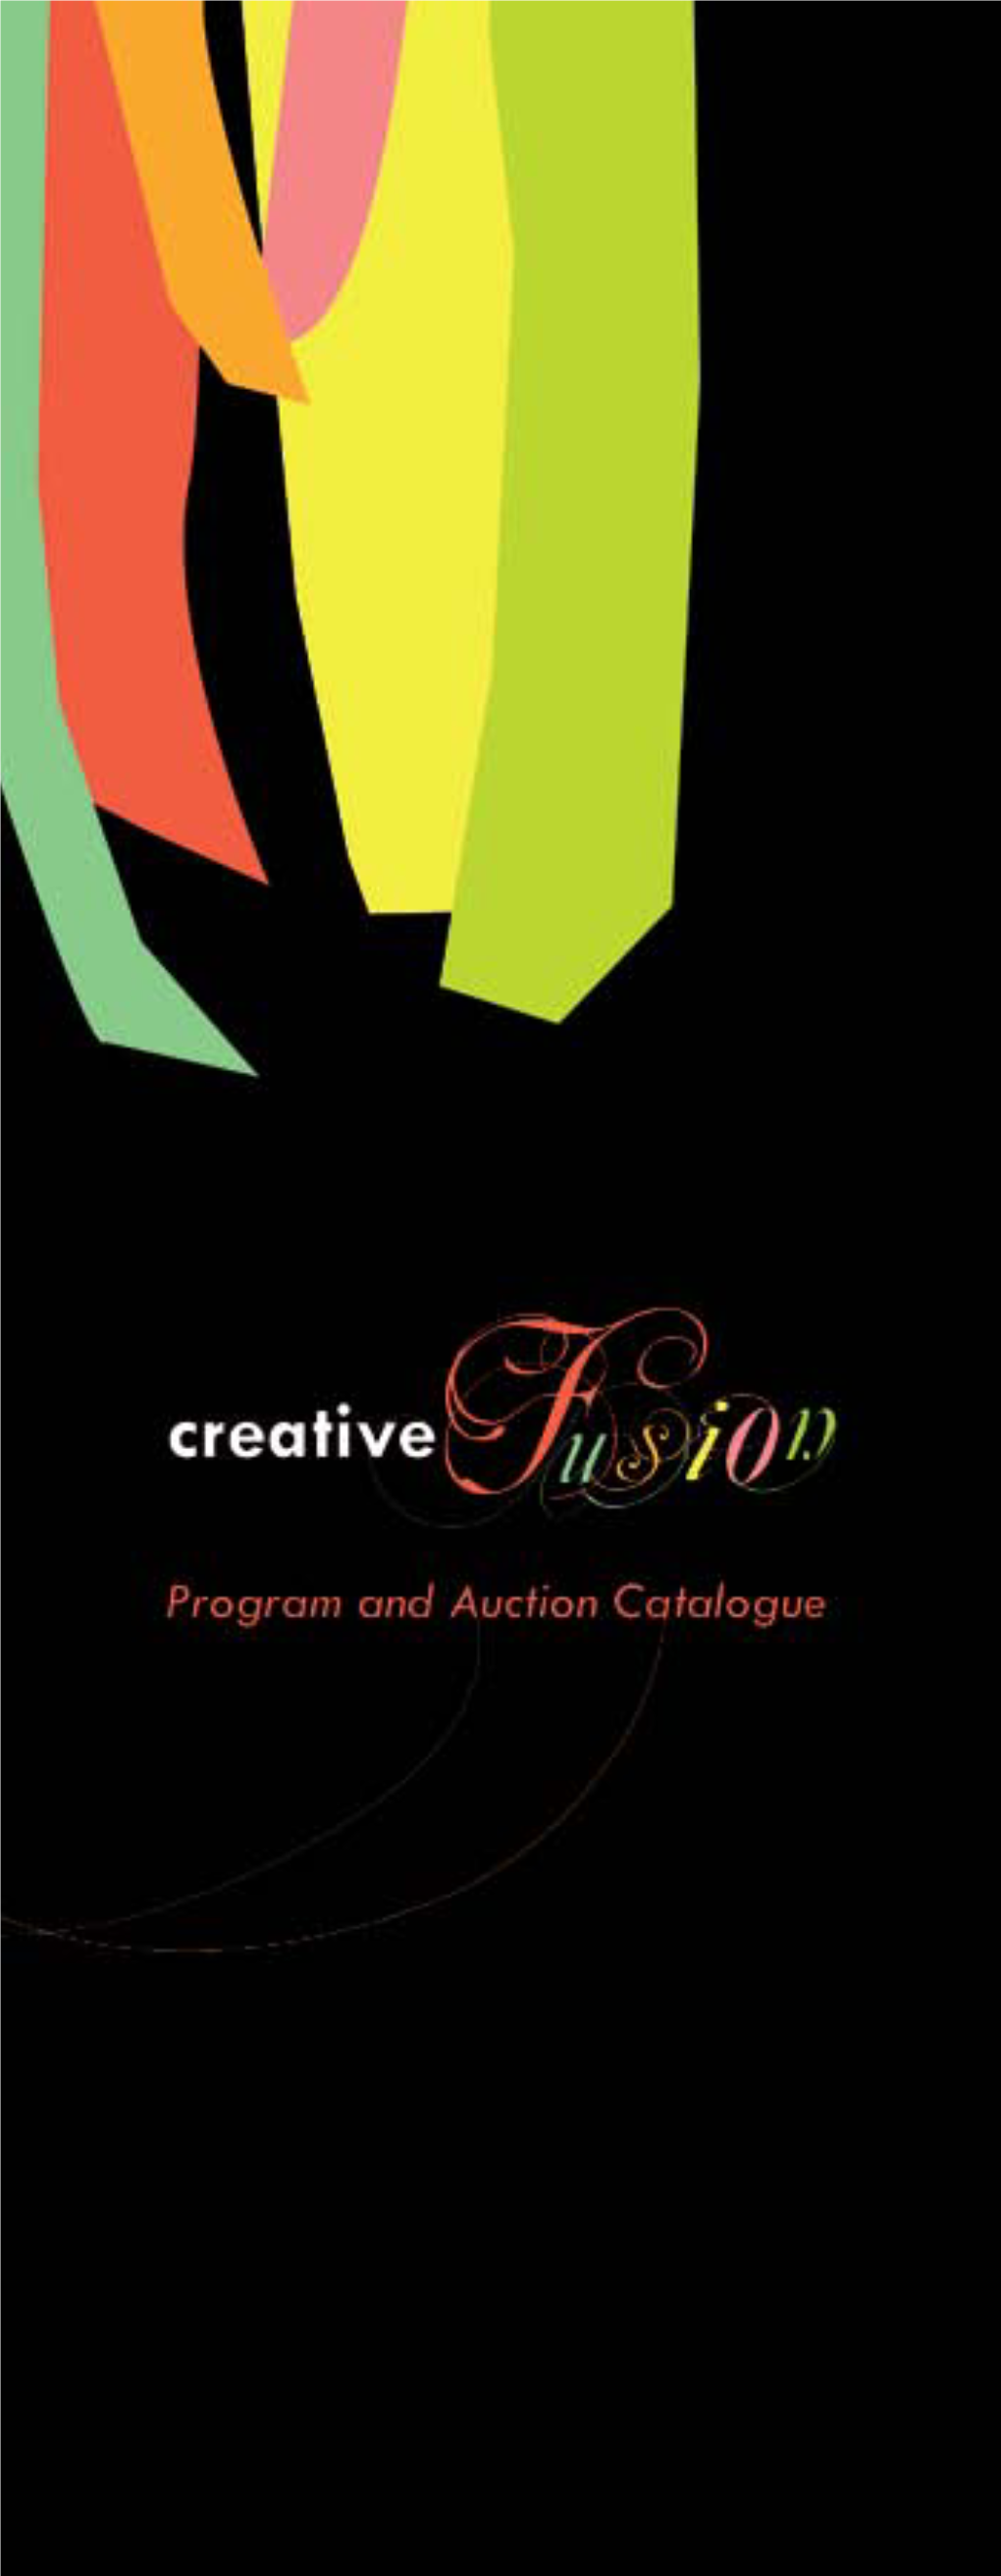 Download the Auction Catalog